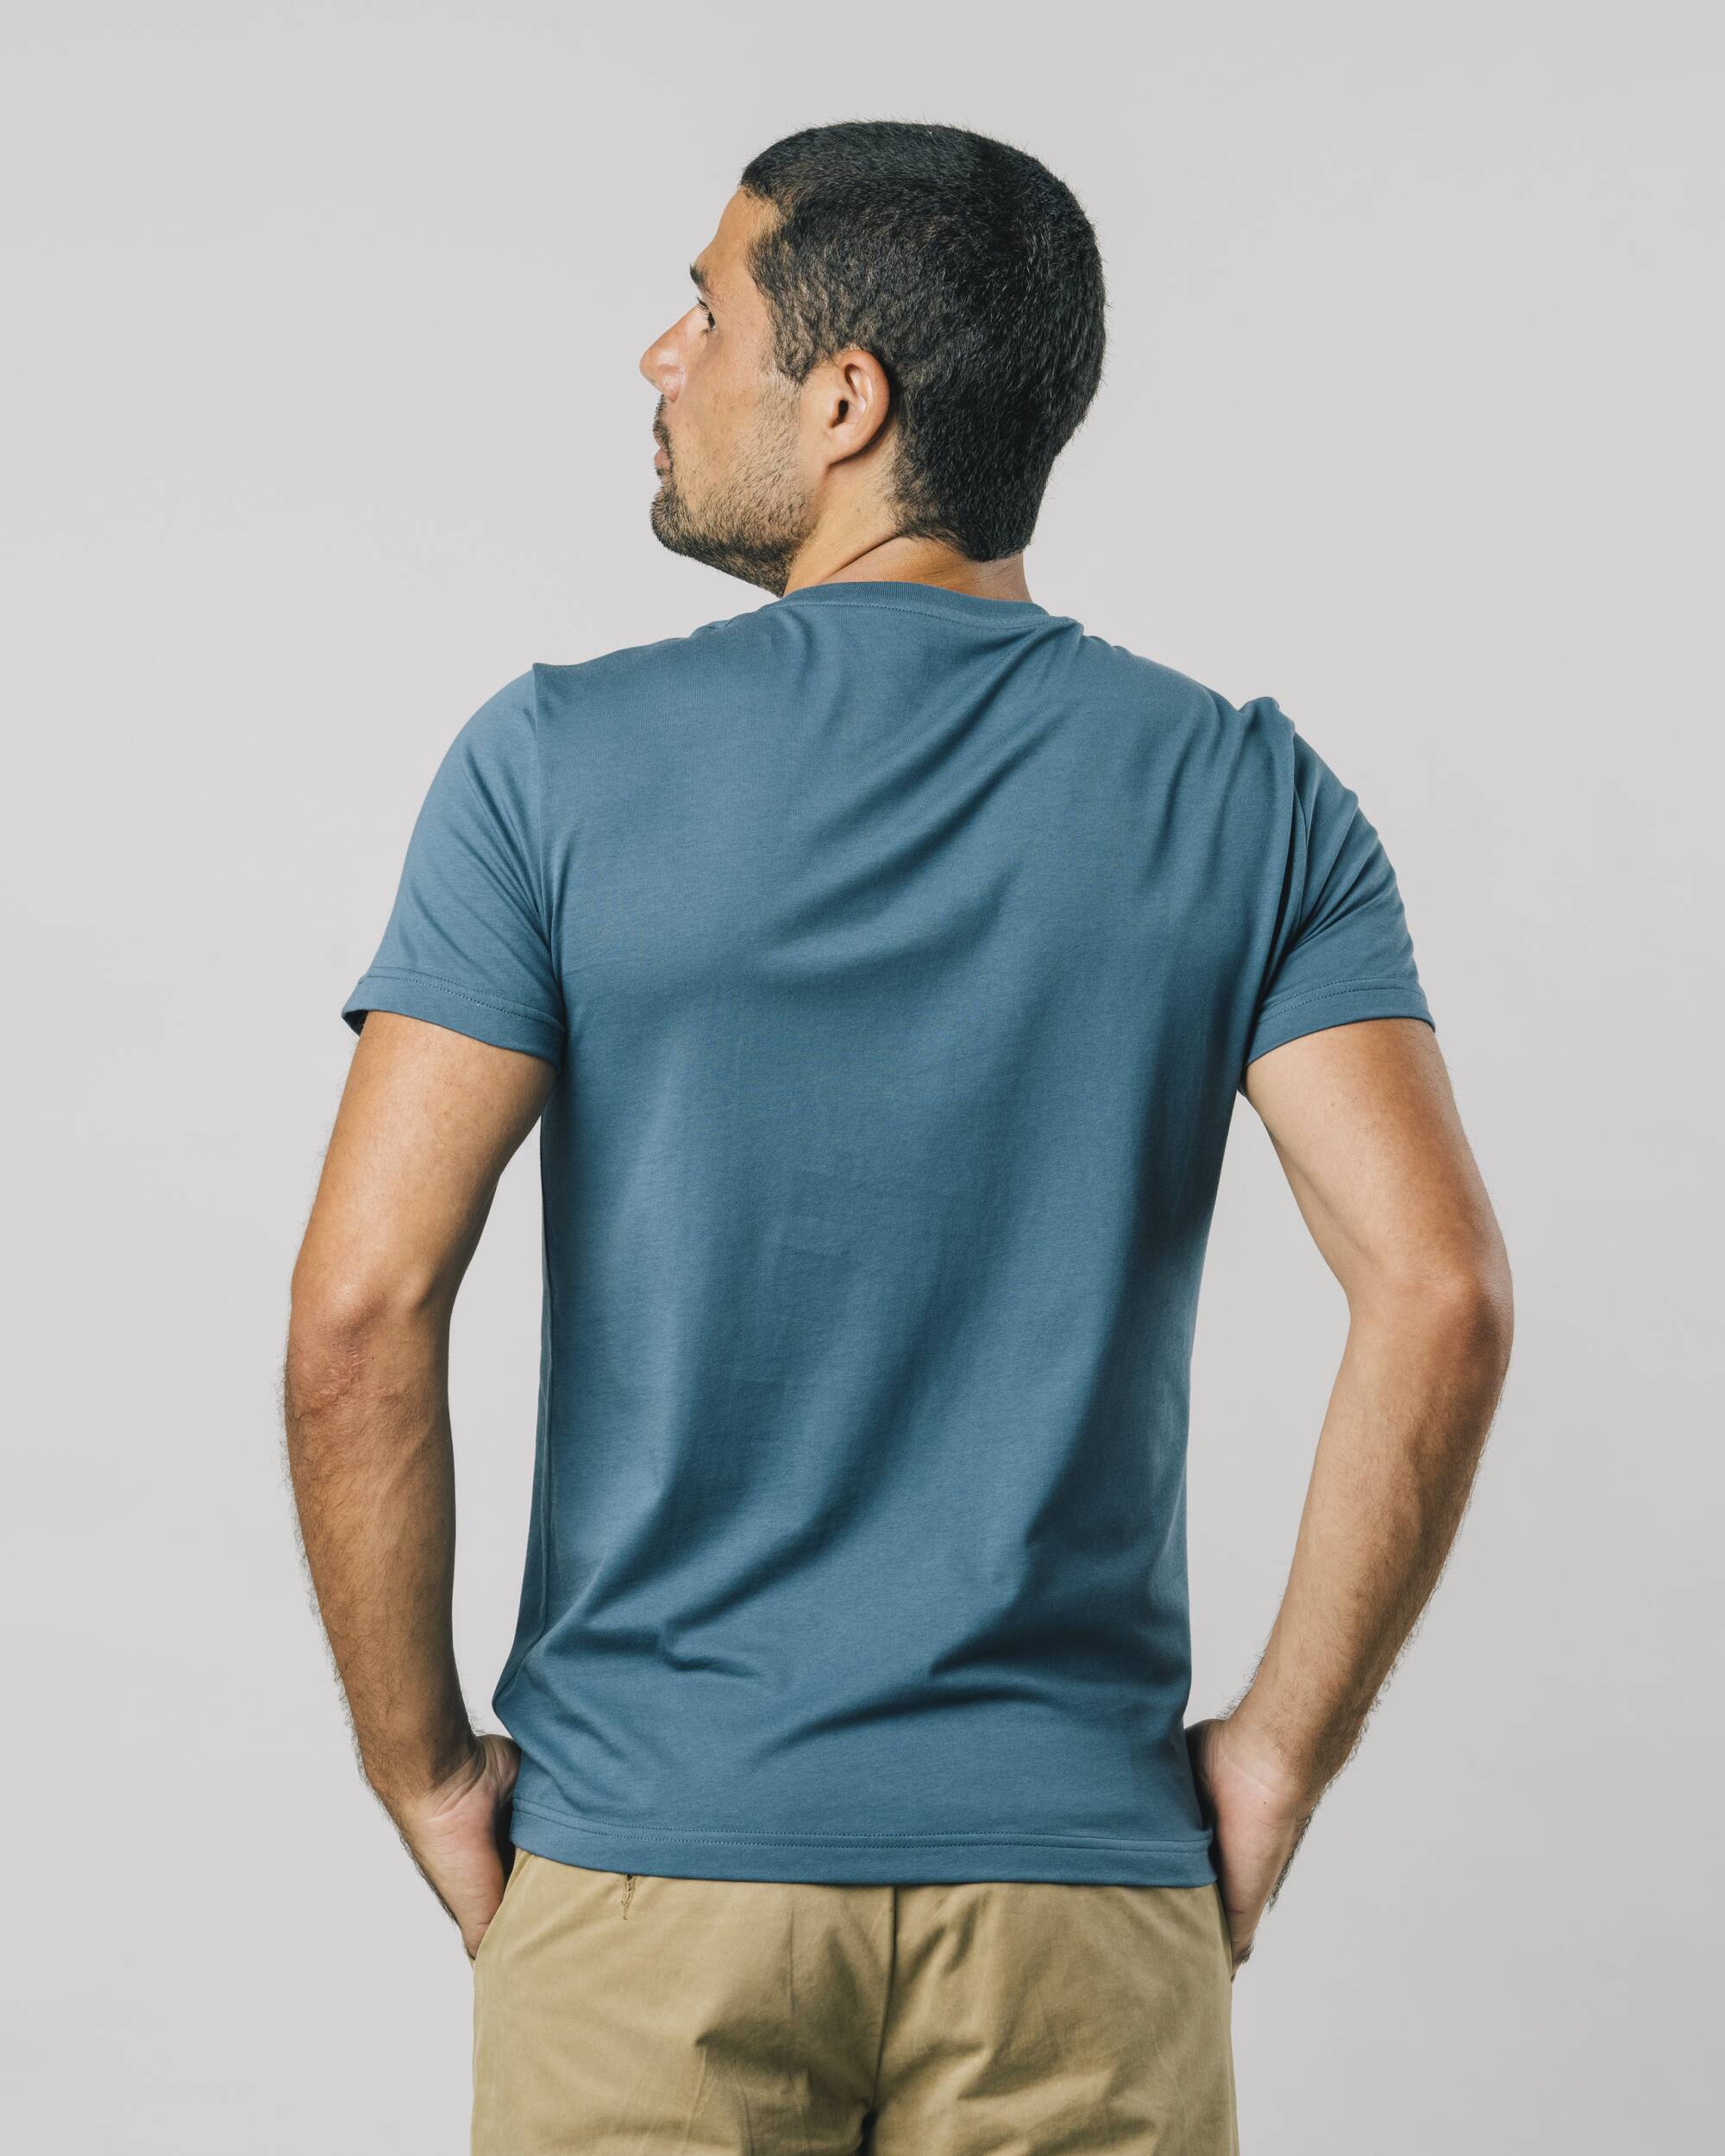 Iconic Fugu T-shirt in blue with a casual duck made from 100% organic cotton from Brava Fabrics